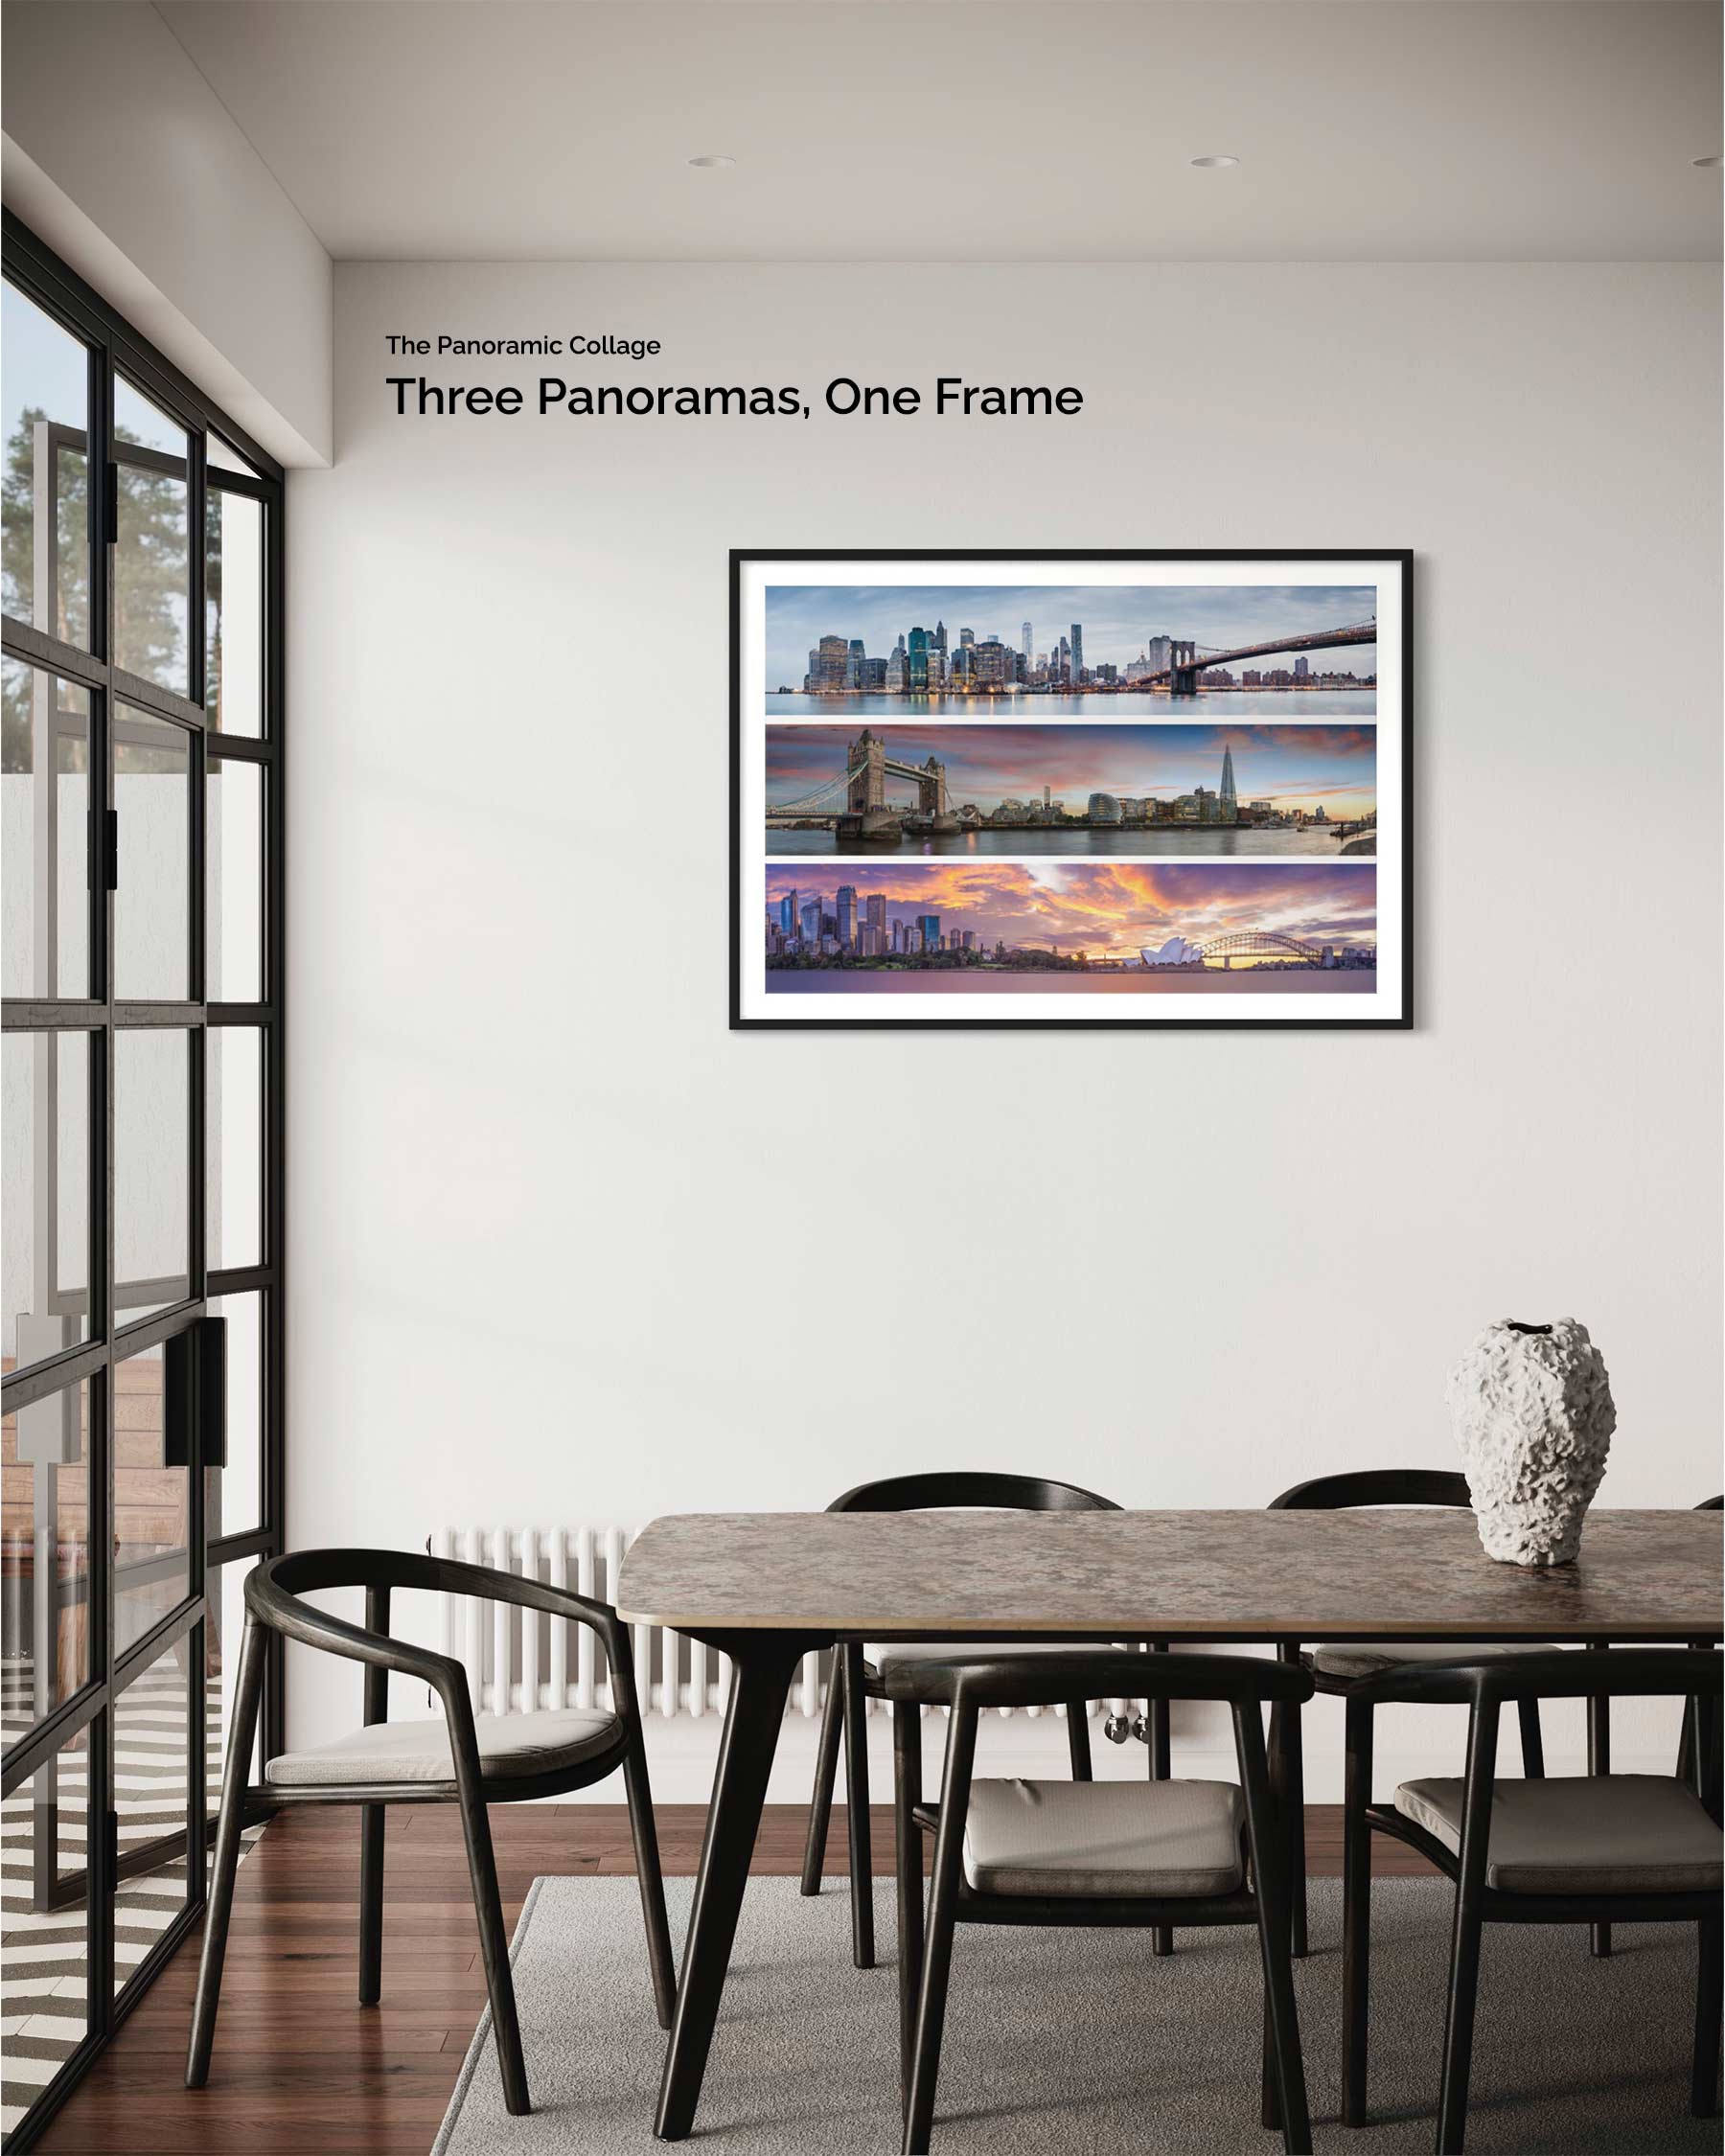 Panoramic collage framed and mounted photo print. Three panoramas in one frame